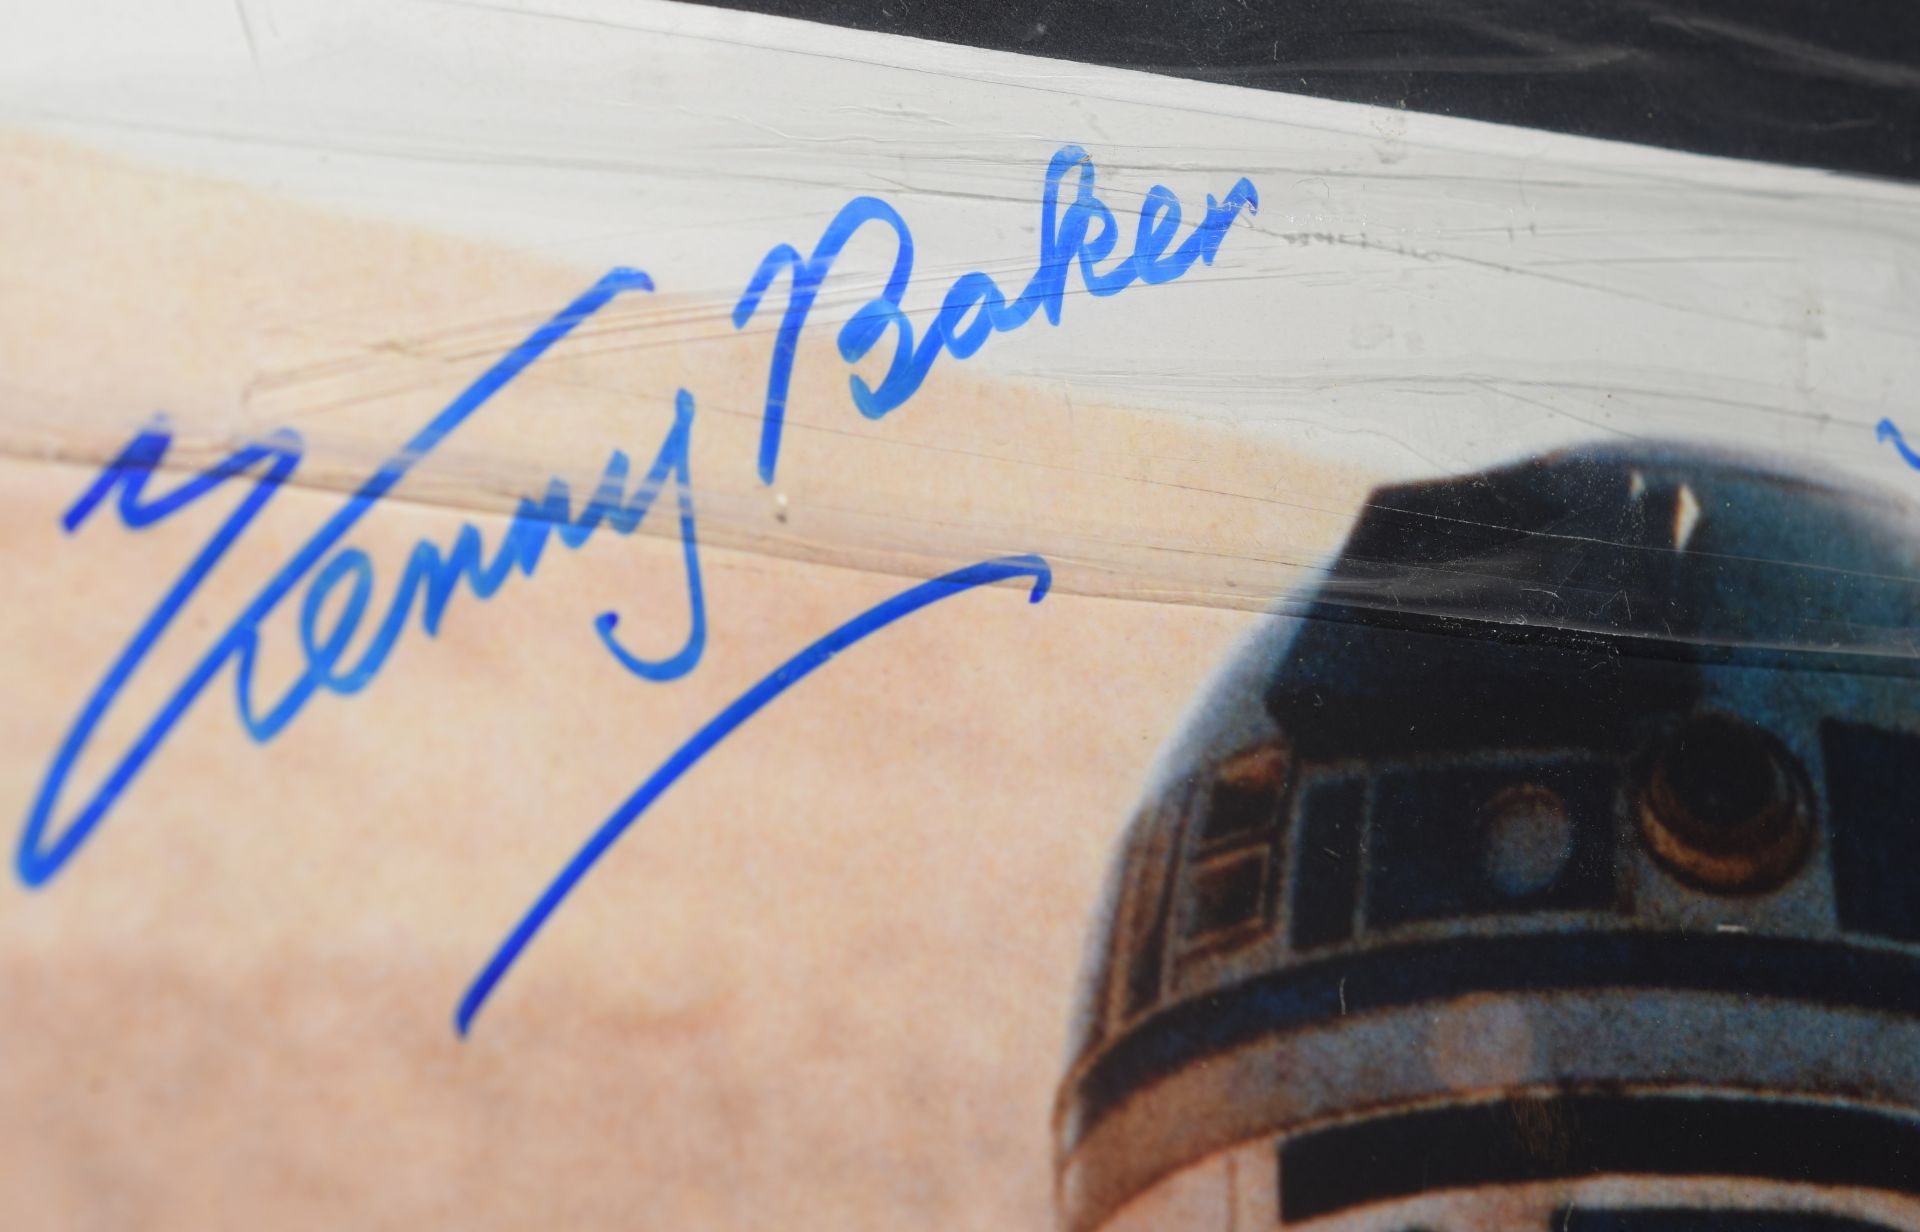 Star Wars Signed Photograph - Image 4 of 4